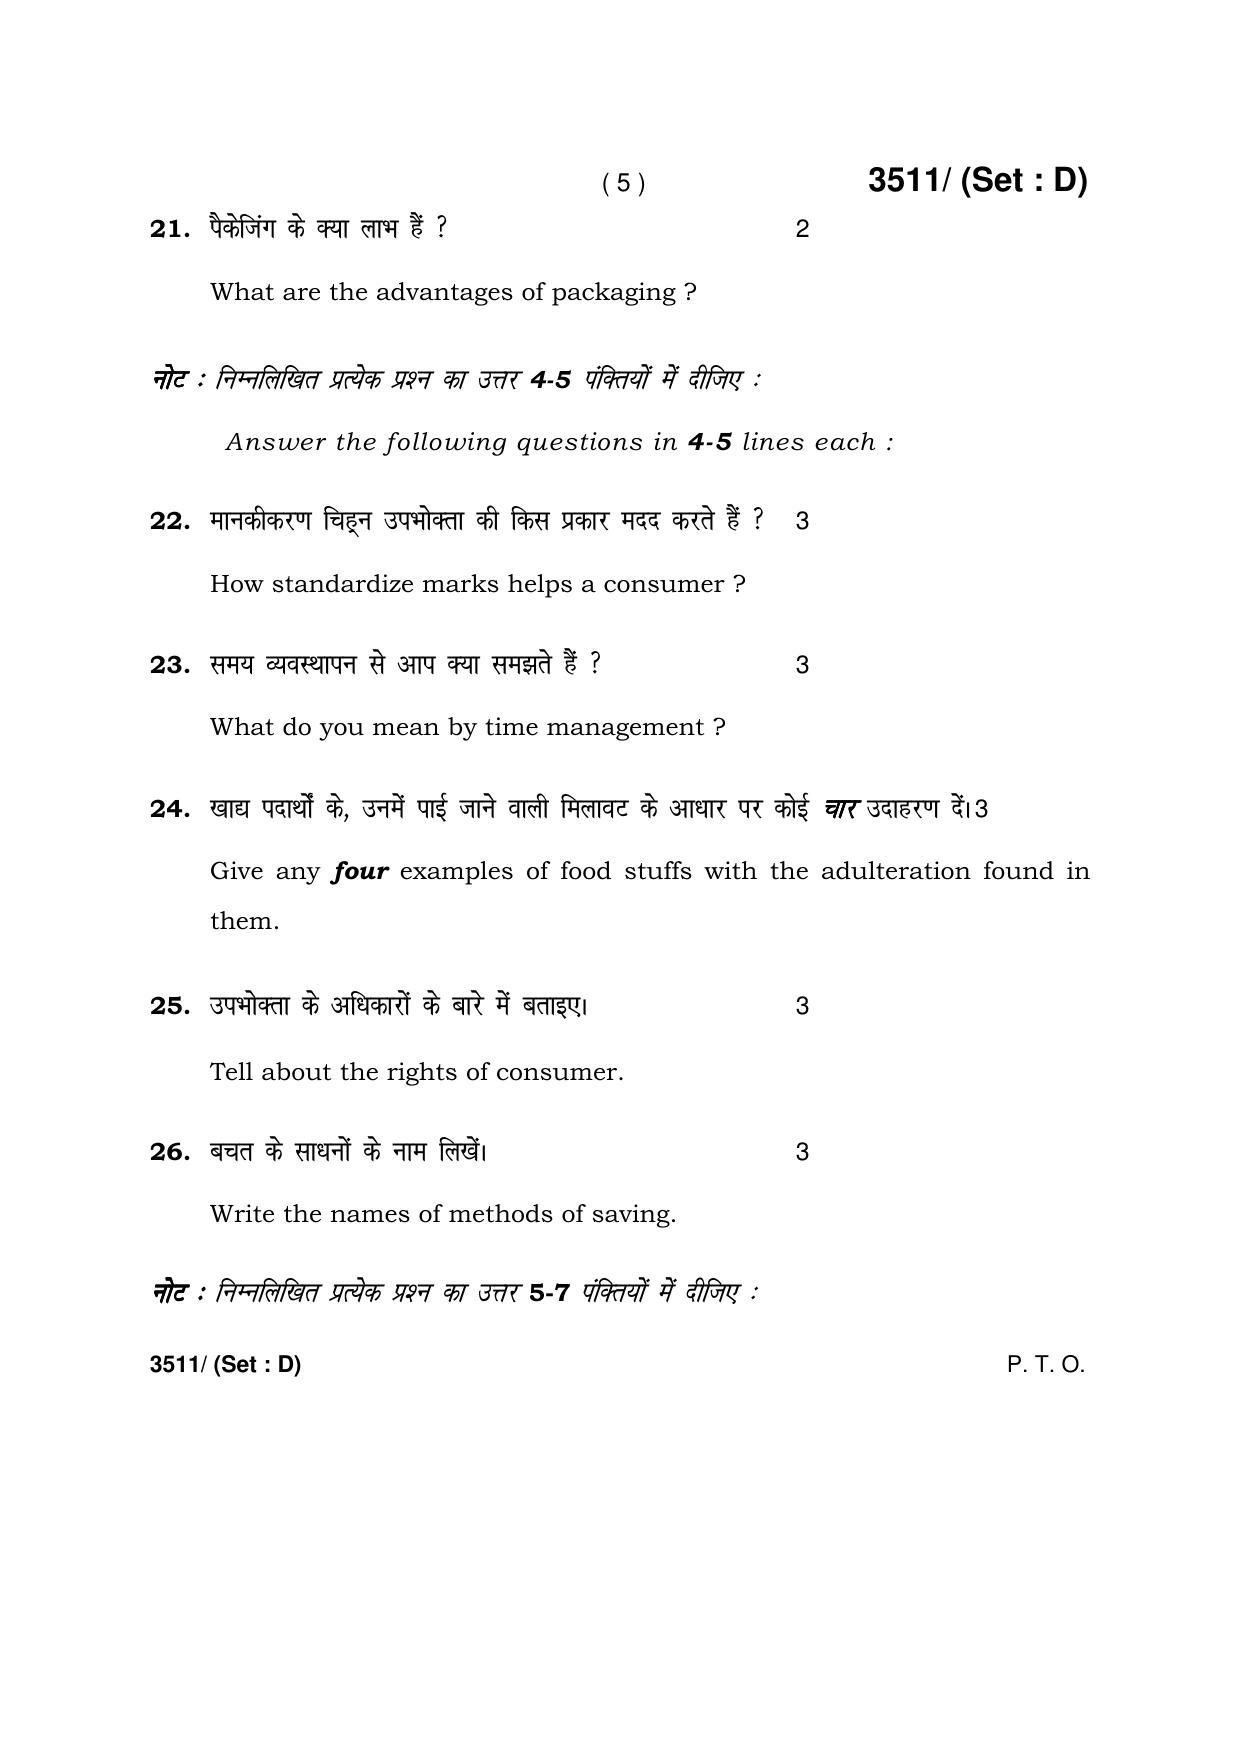 Haryana Board HBSE Class 10 Home Science -D 2018 Question Paper - Page 5